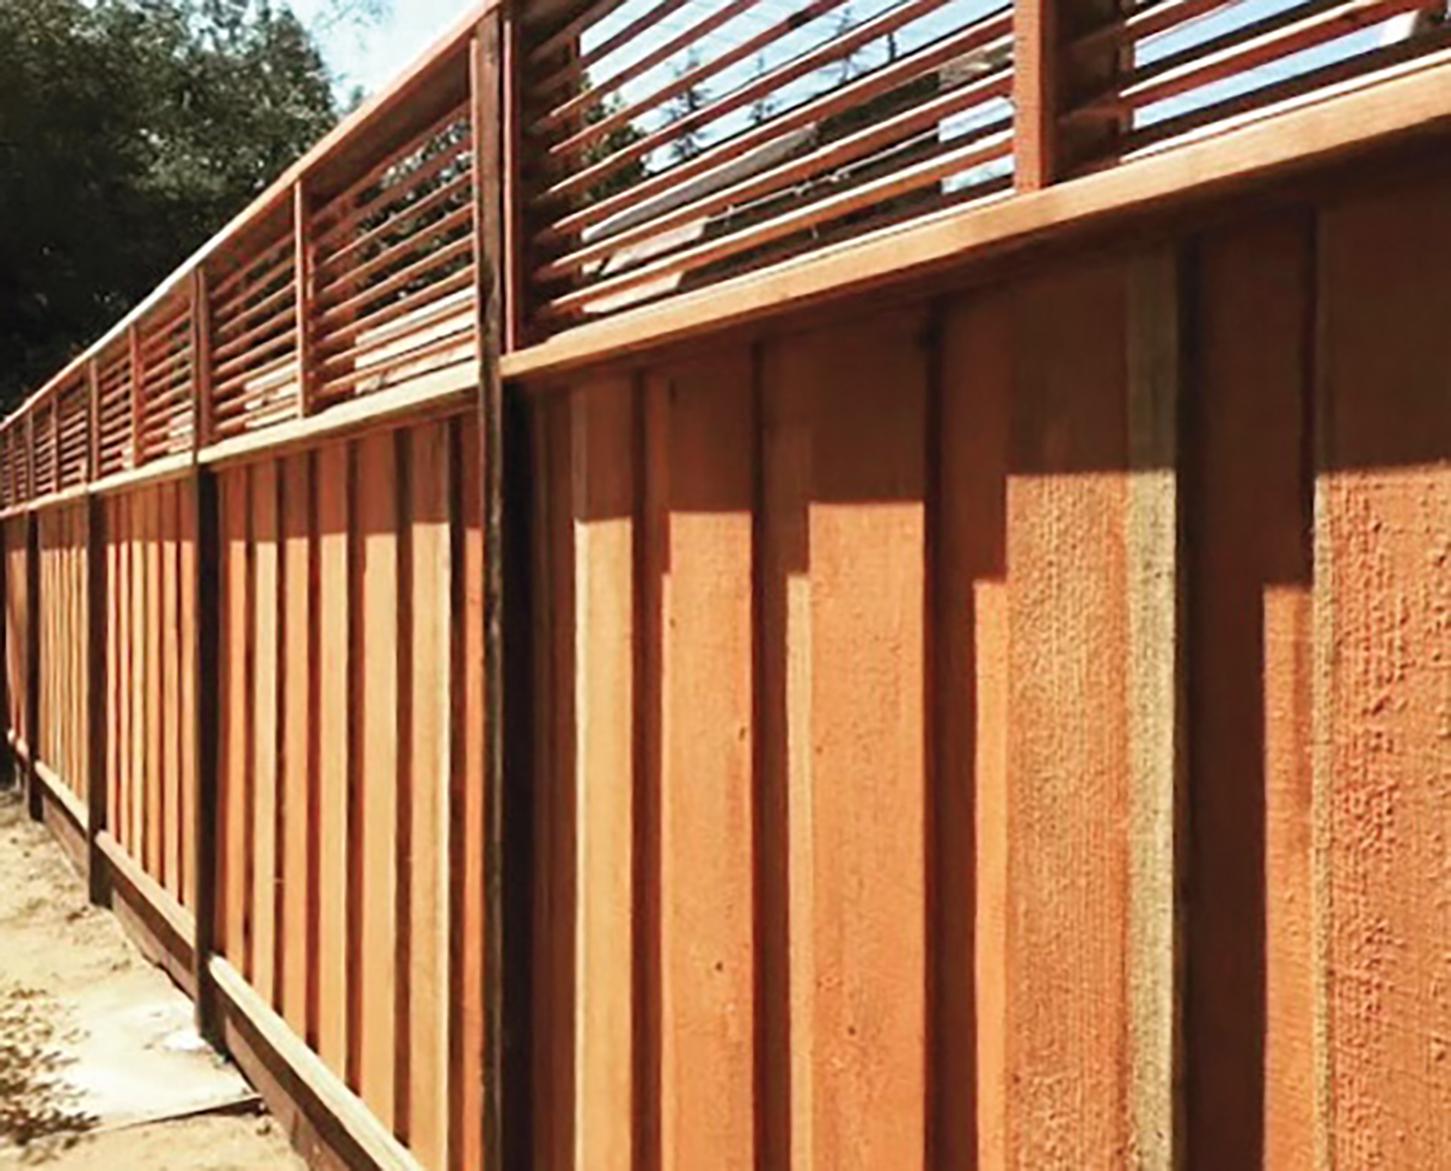 Picture of Guy's Fencing’s signature product is a board-on-board fence with custom louvers. - Guy's Fencing